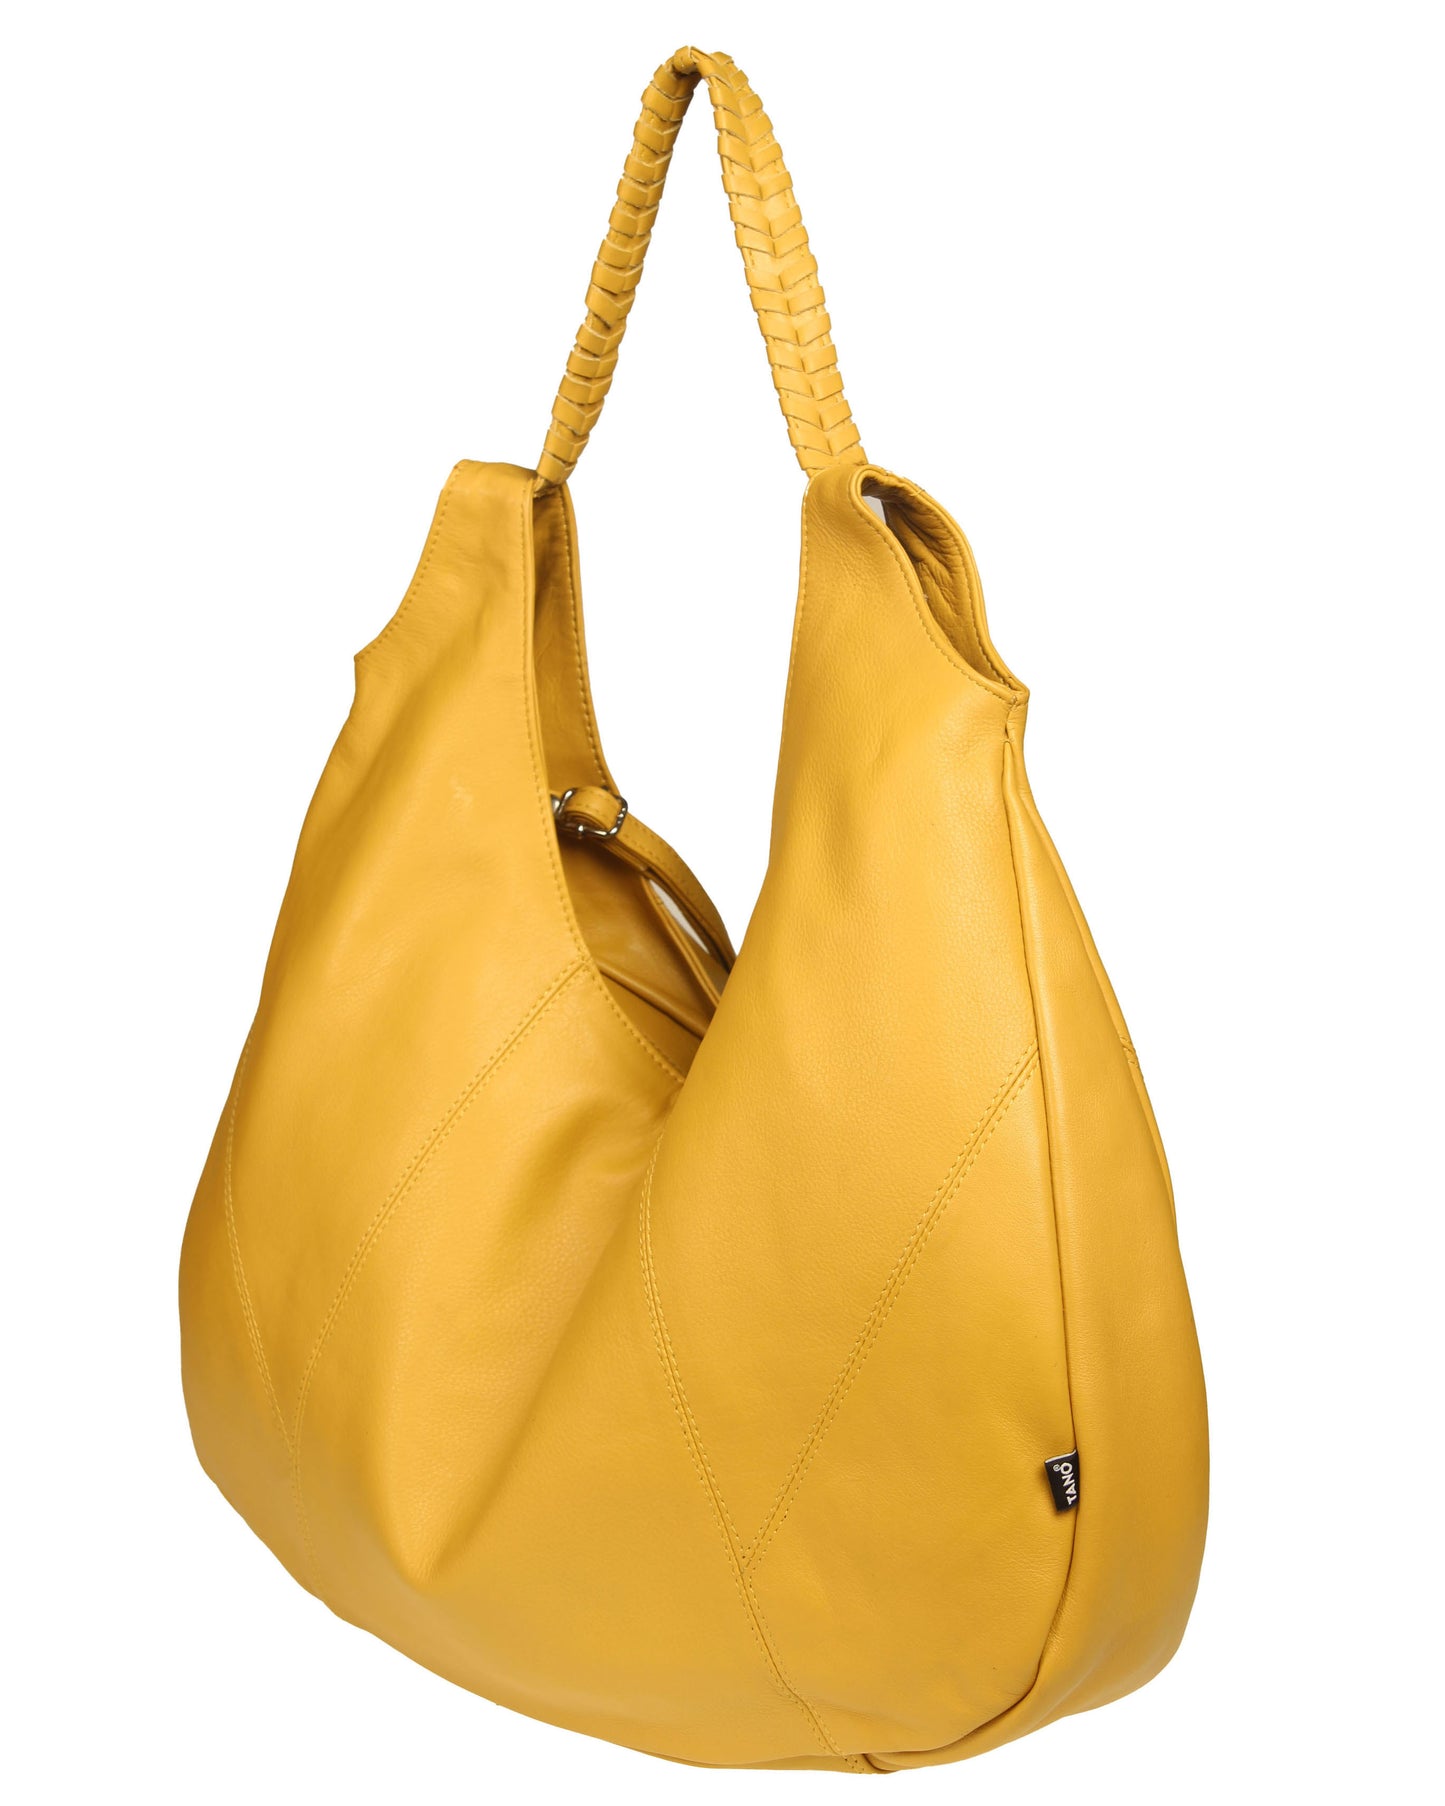 Soft Italian Vintage Convertible Hobo with Whipstitch Handle